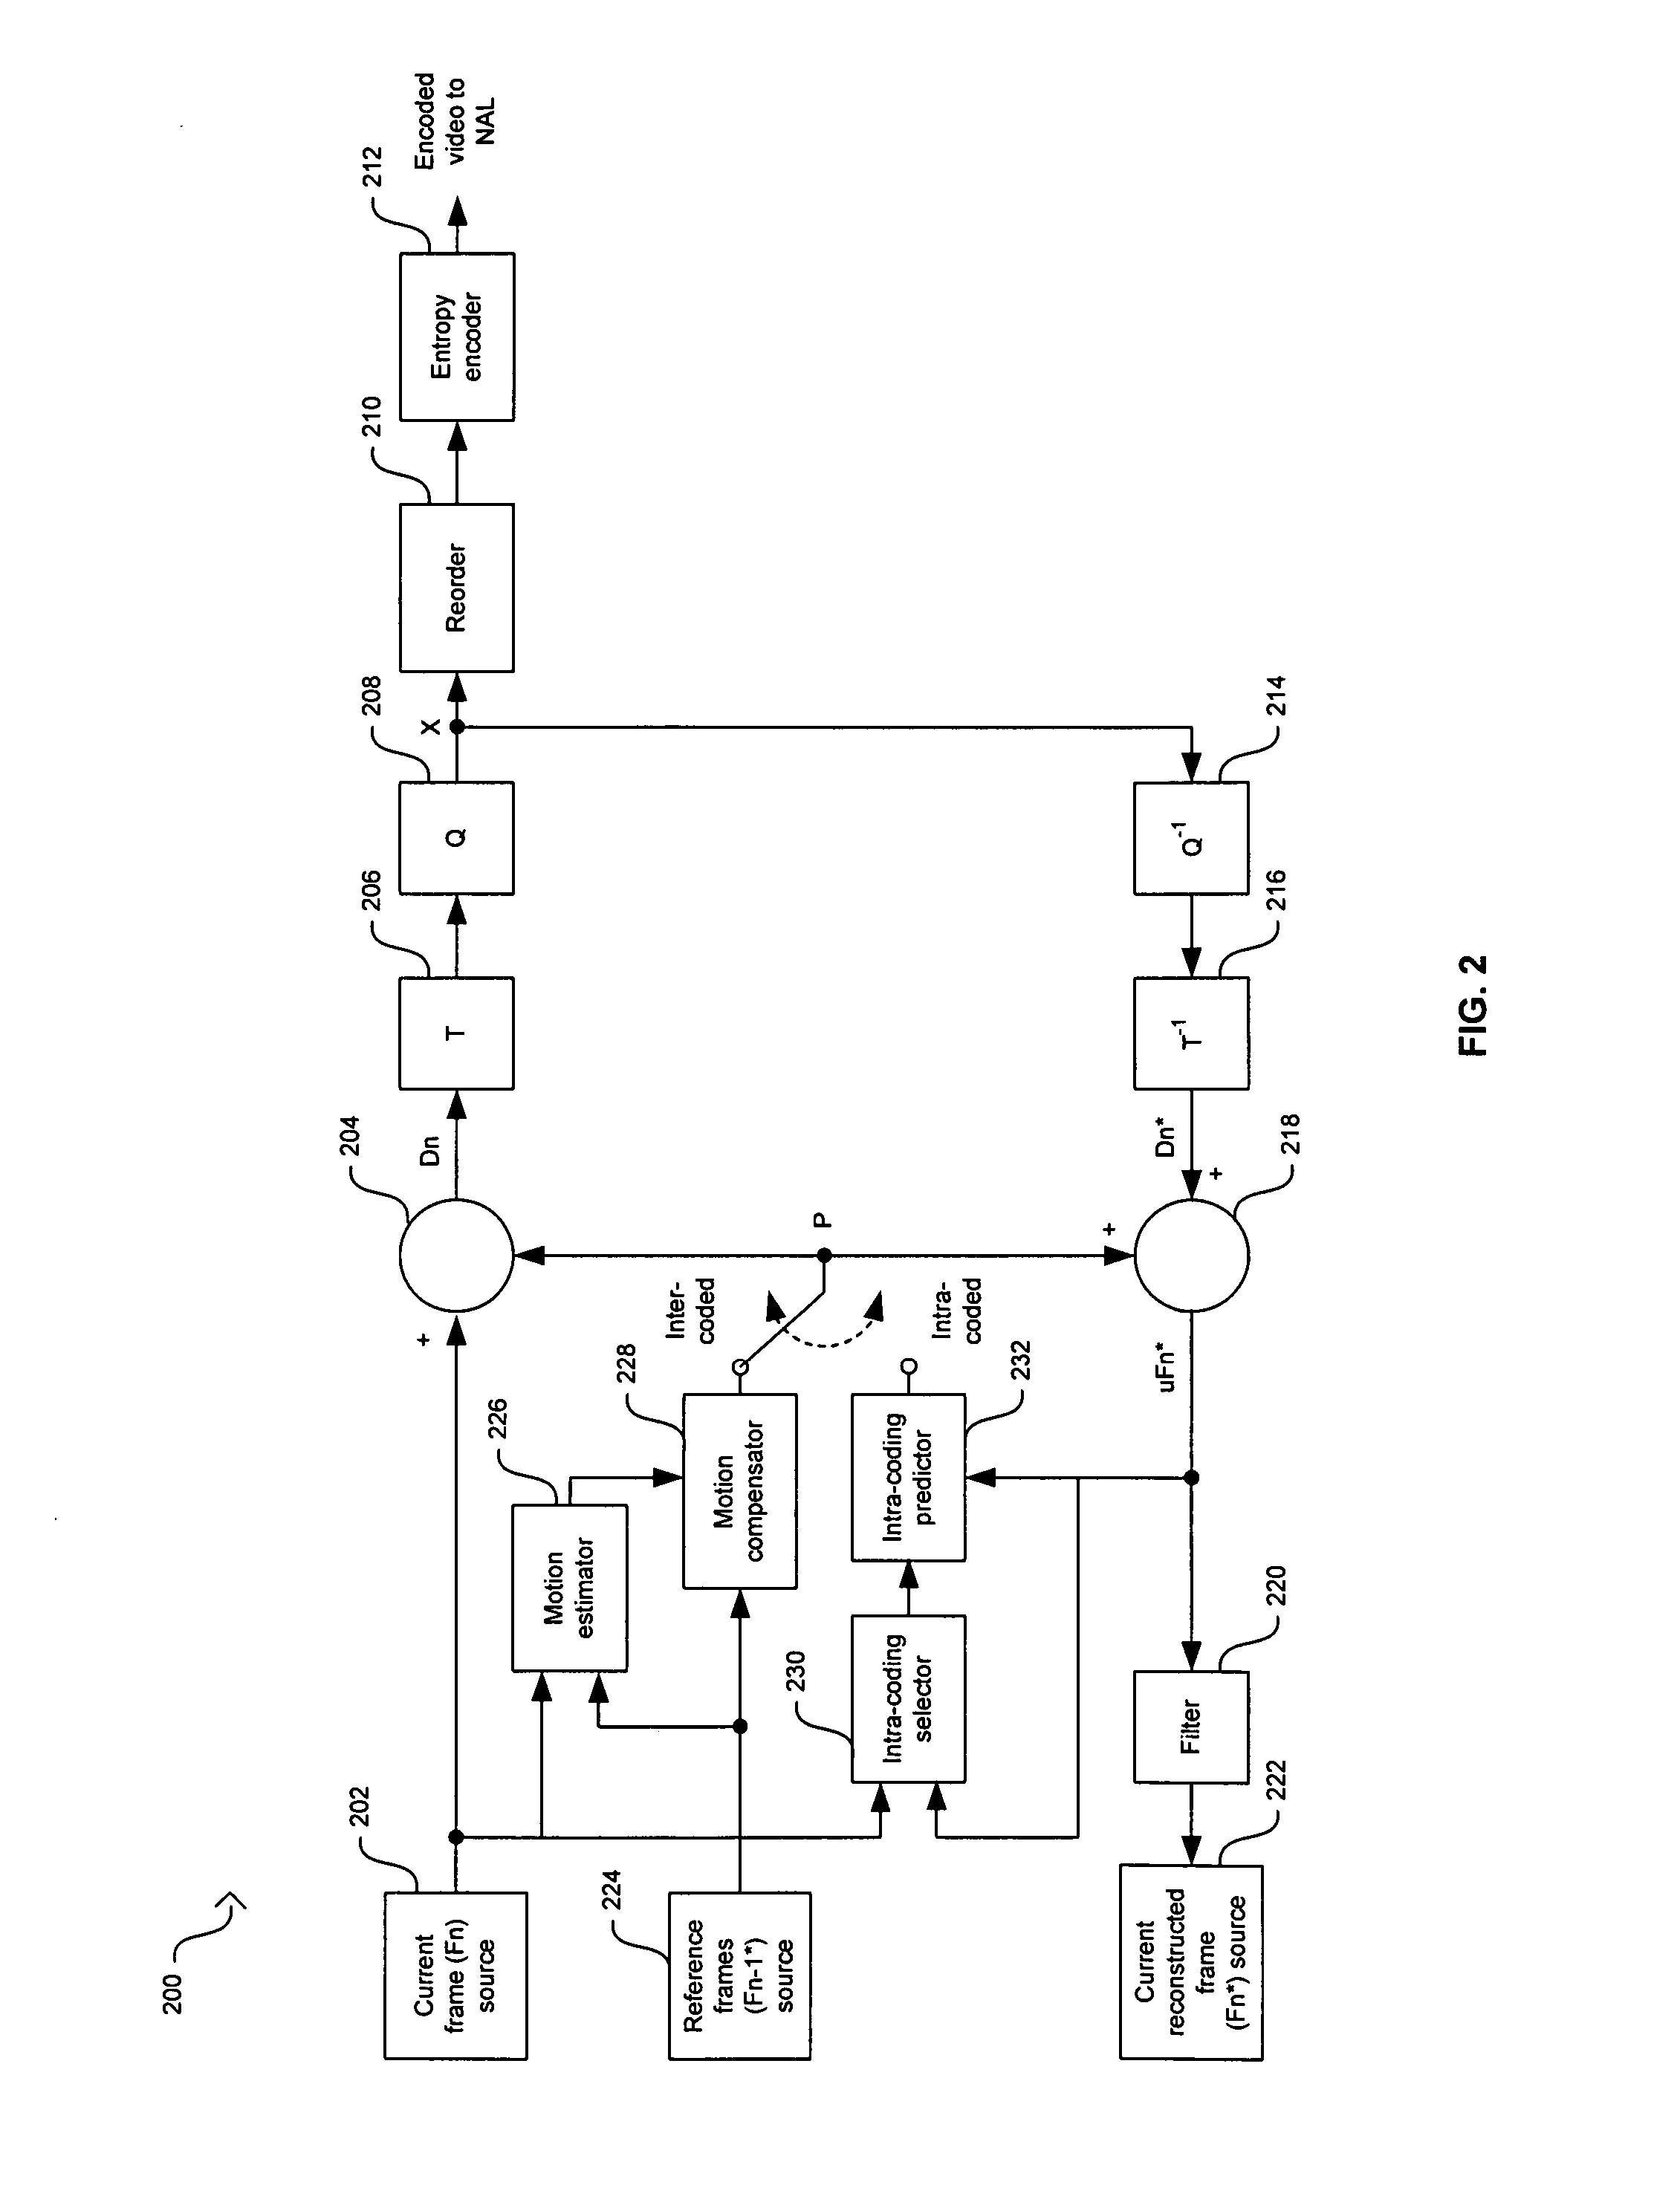 Method and system for high speed video encoding using parallel encoders